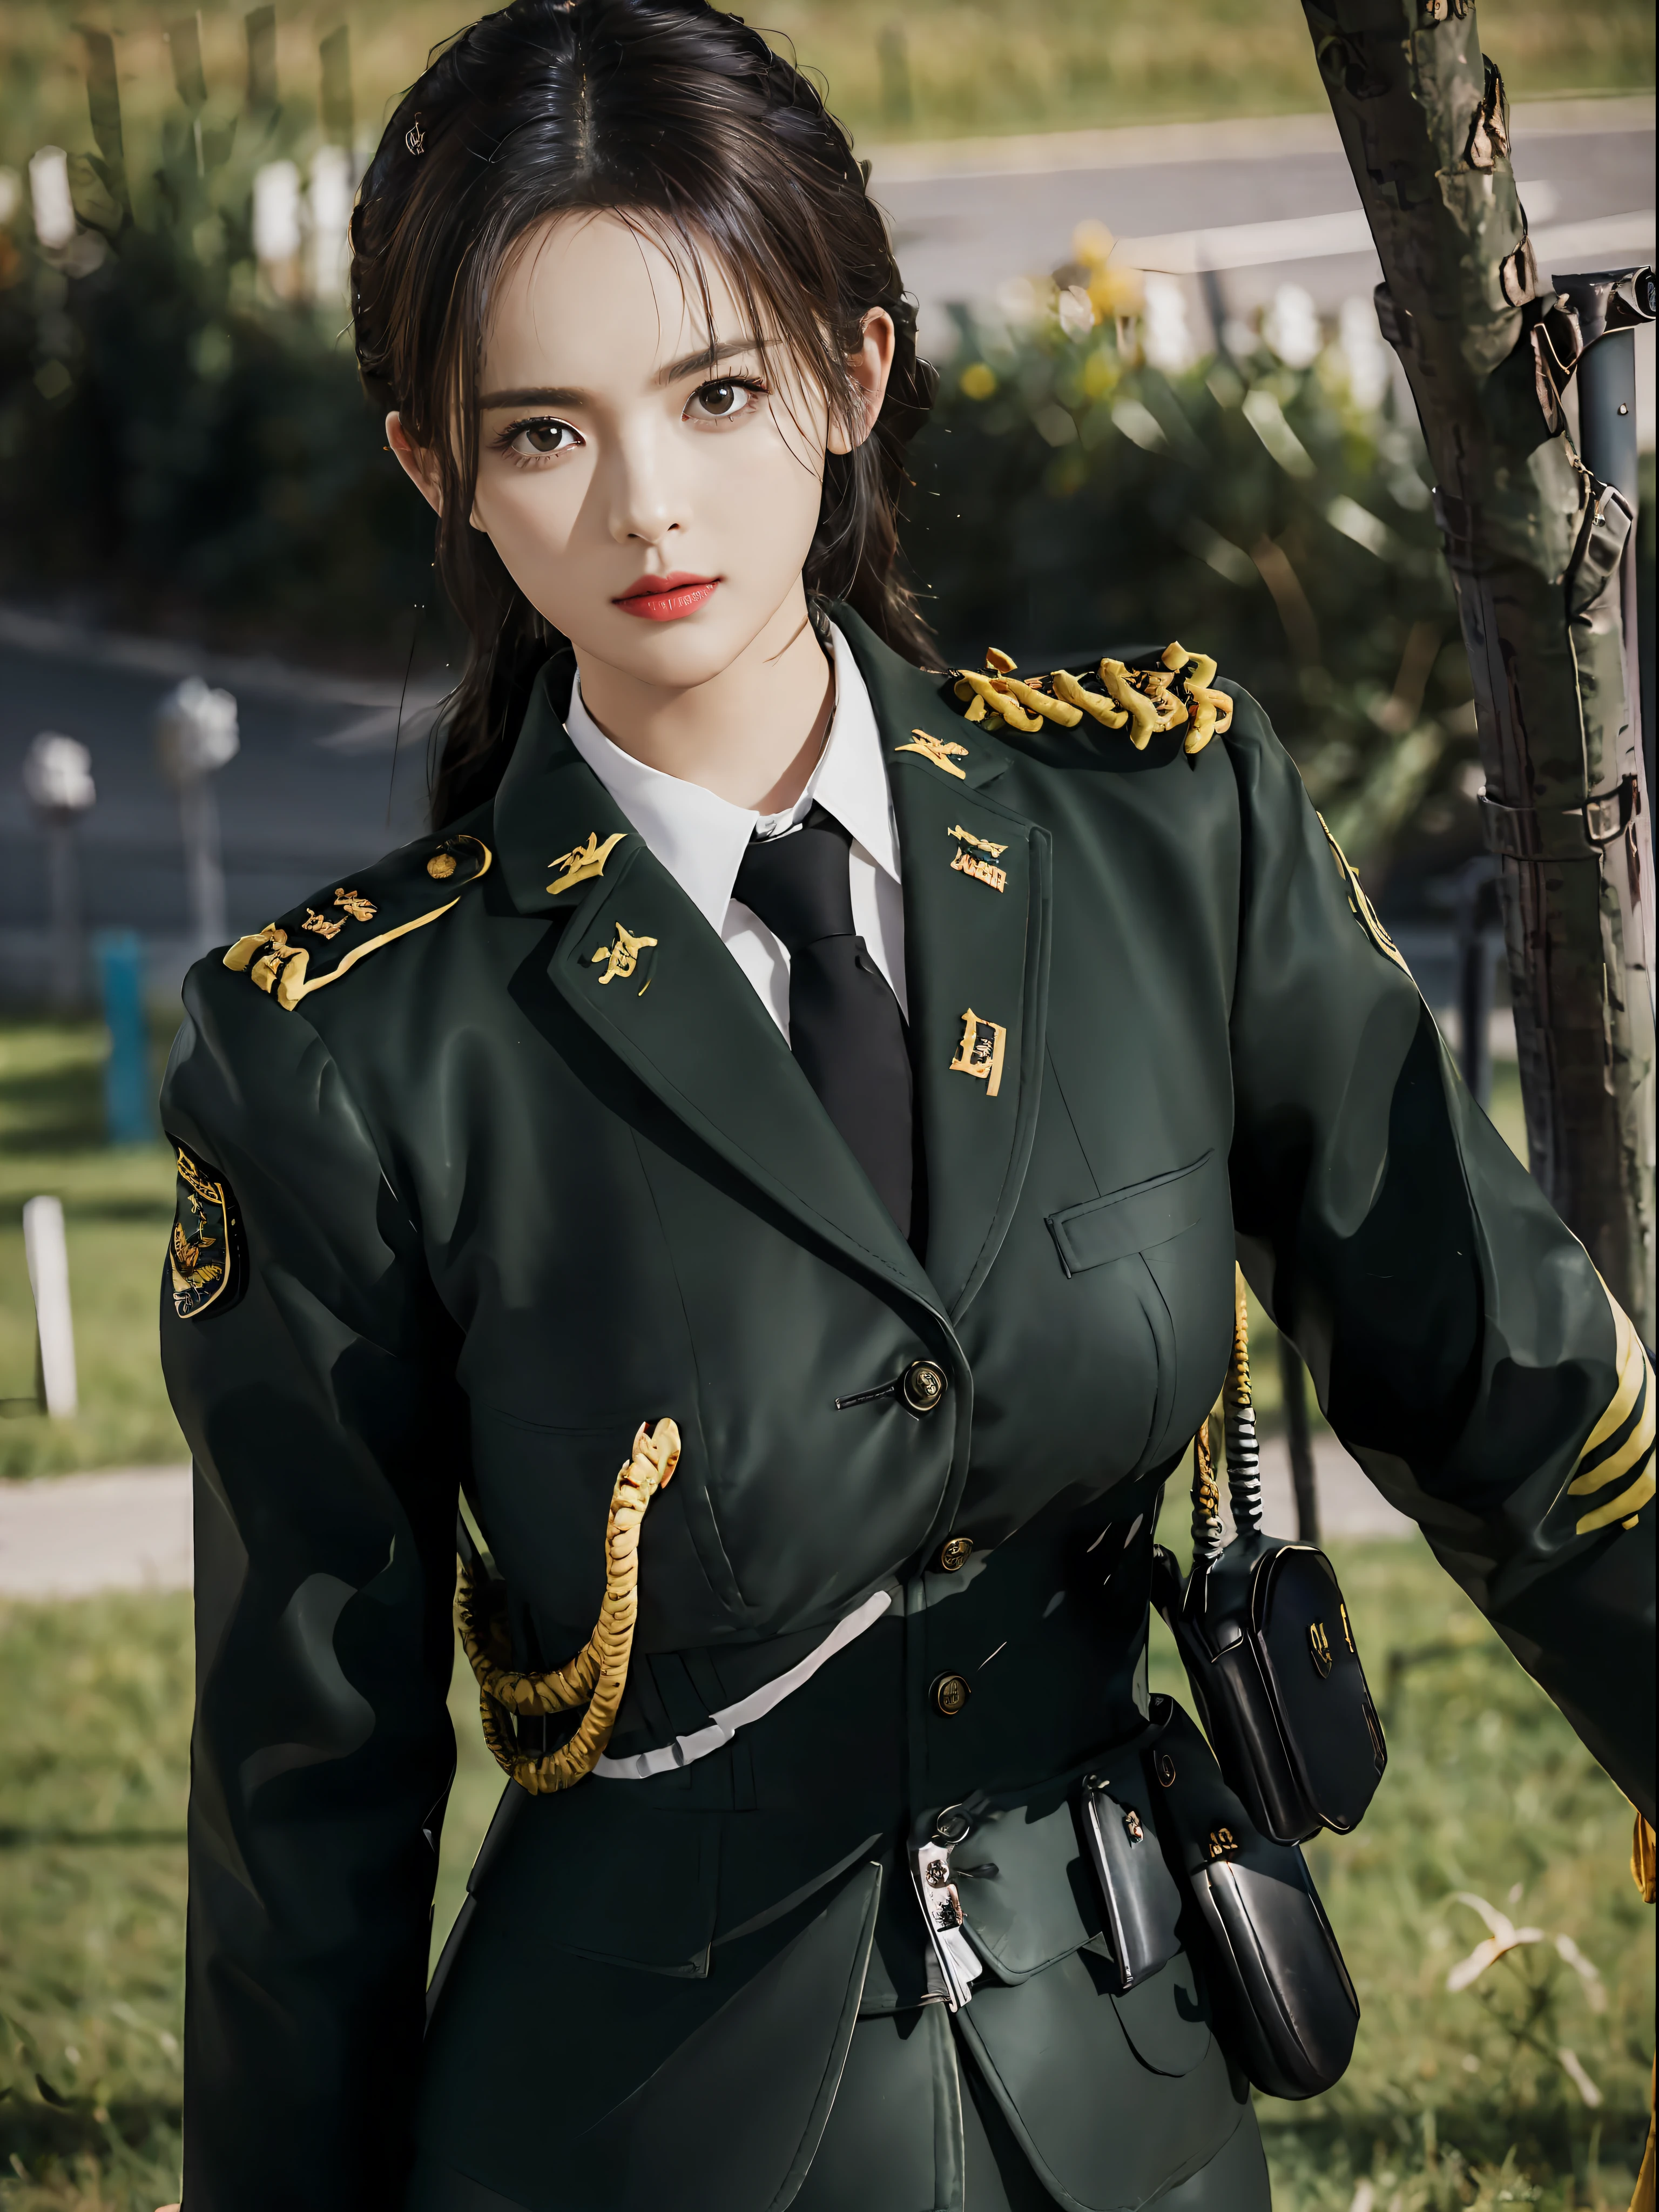 Very detailed CG unity 8K wallpaper，（tmasterpiece），（best qualtiy），（ultra - detailed），（Ultra photo realsisim），（best character detail：1.36），Nikon D750 f / 1.4 55mm，profesional lighting， physically-based renderingt, 1girll, Female soldier，army suit，Dark green military uniform，Fabric texture military uniform，Pure white lining，Dark green tie，Black hair，the golden ratio,[:(com rosto detalhado:1.2):0.2]:,PureErosFace_V1, broad shoulder,(Bigchest:1.5),(big assa:1.5)，Soaked with sweat，red flags，In the square，Splendid scenery，bright sun，upper body photos，Place your hands on your chest，